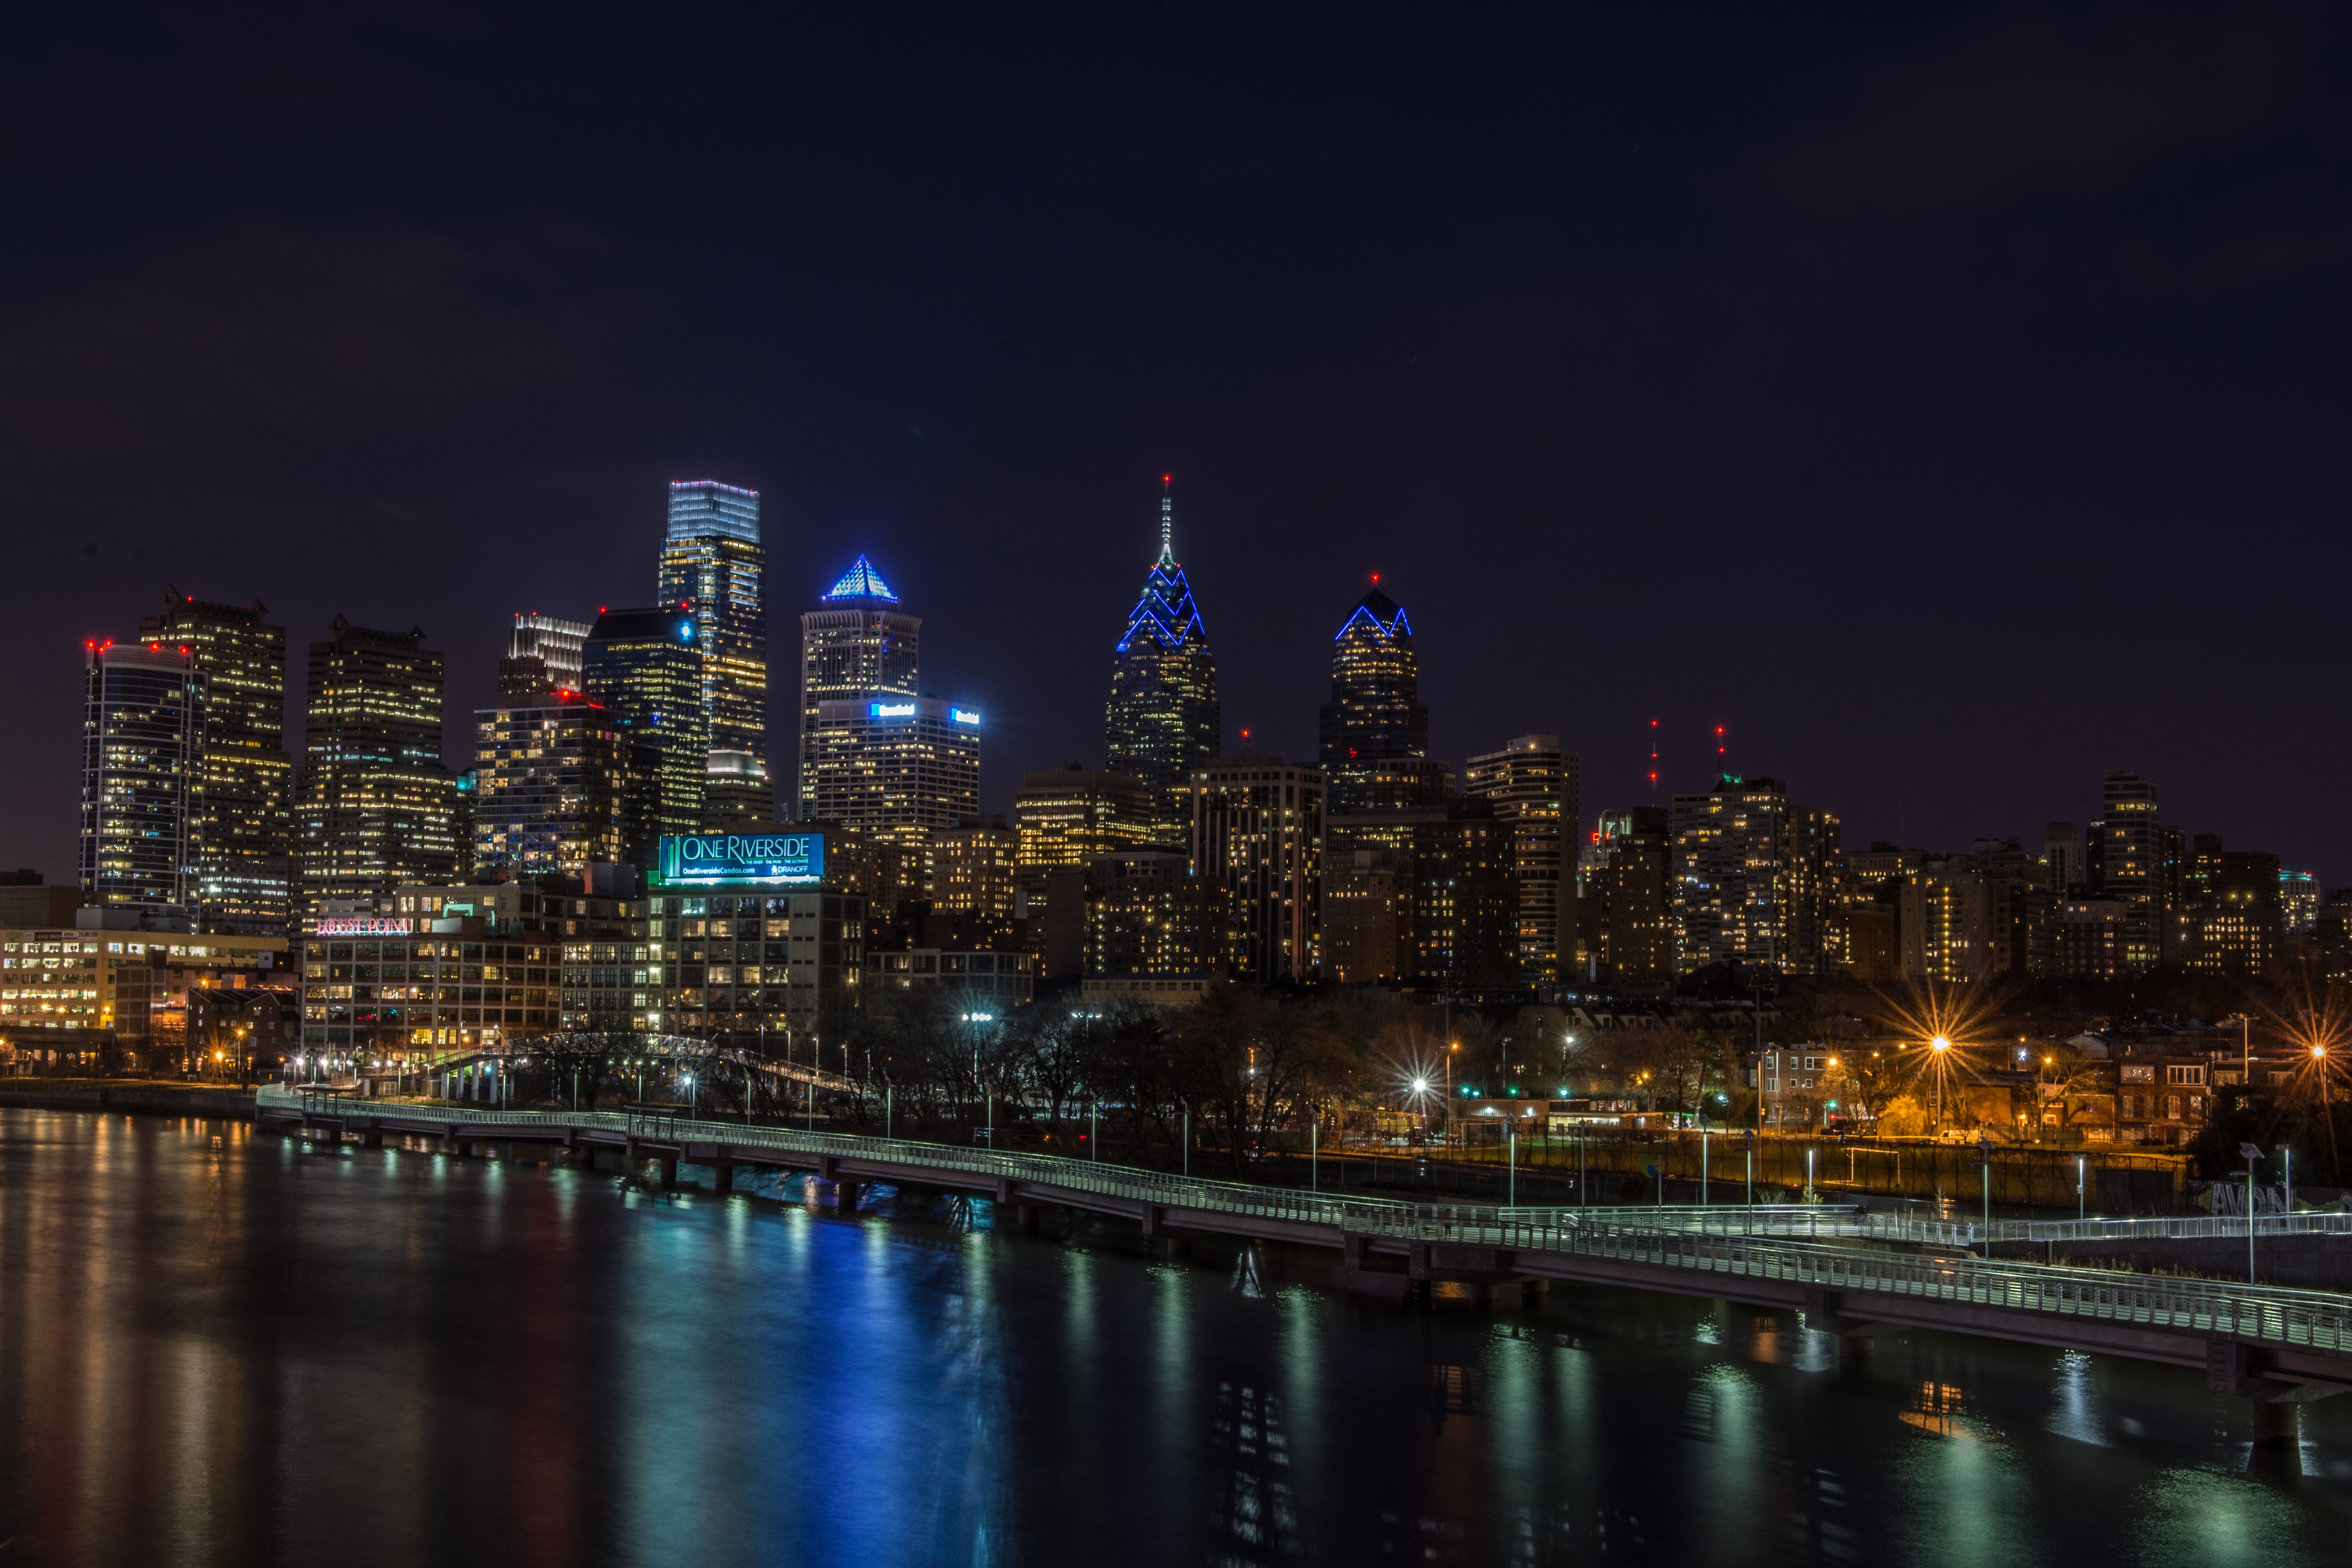 cities, water, building, lights, reflection, night city Full HD